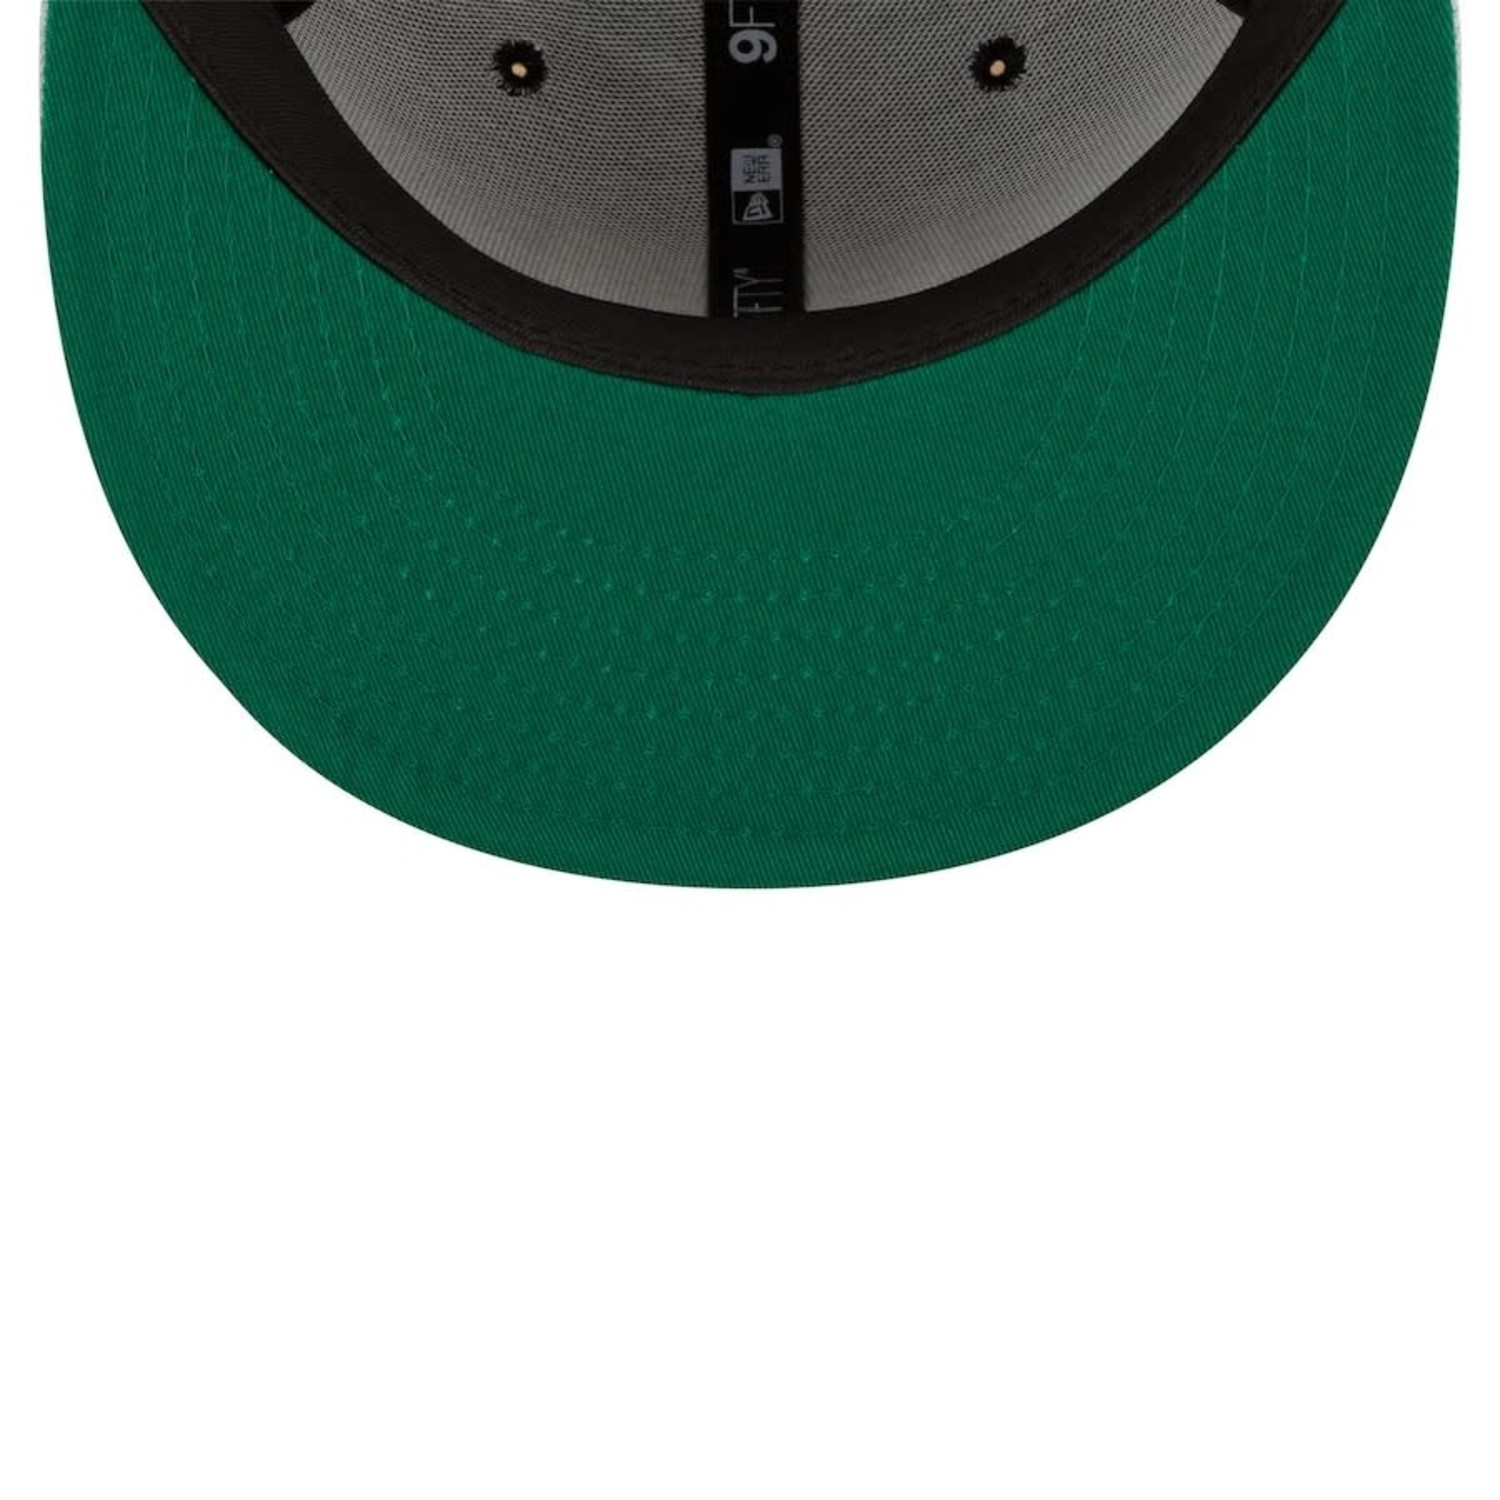 New Era 9FIFTY New York Yankees Letter Arch Snapback